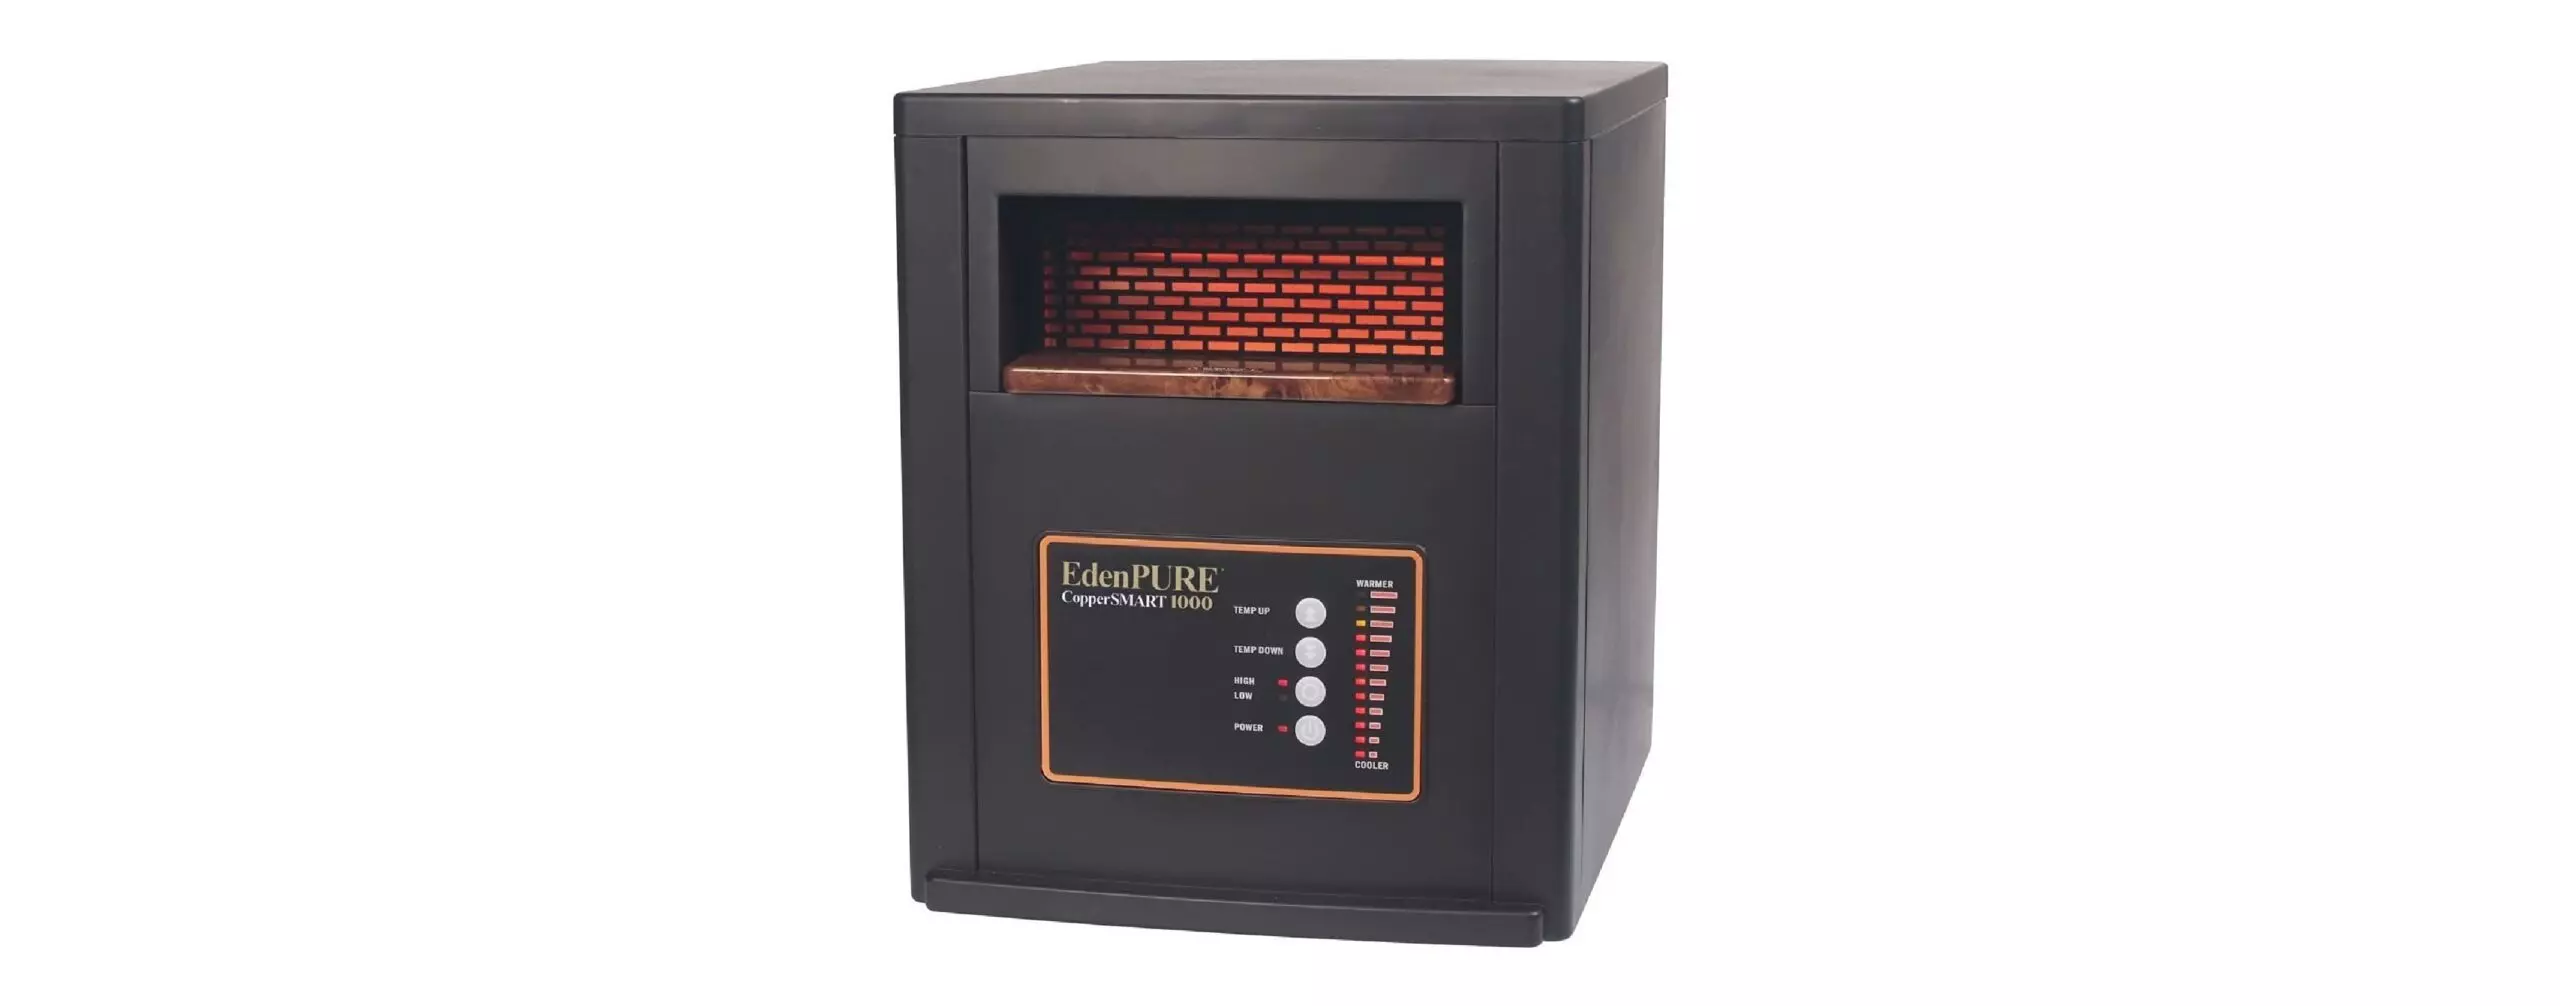 The Best Infrared Heaters (Review & Buying Guide) 2021